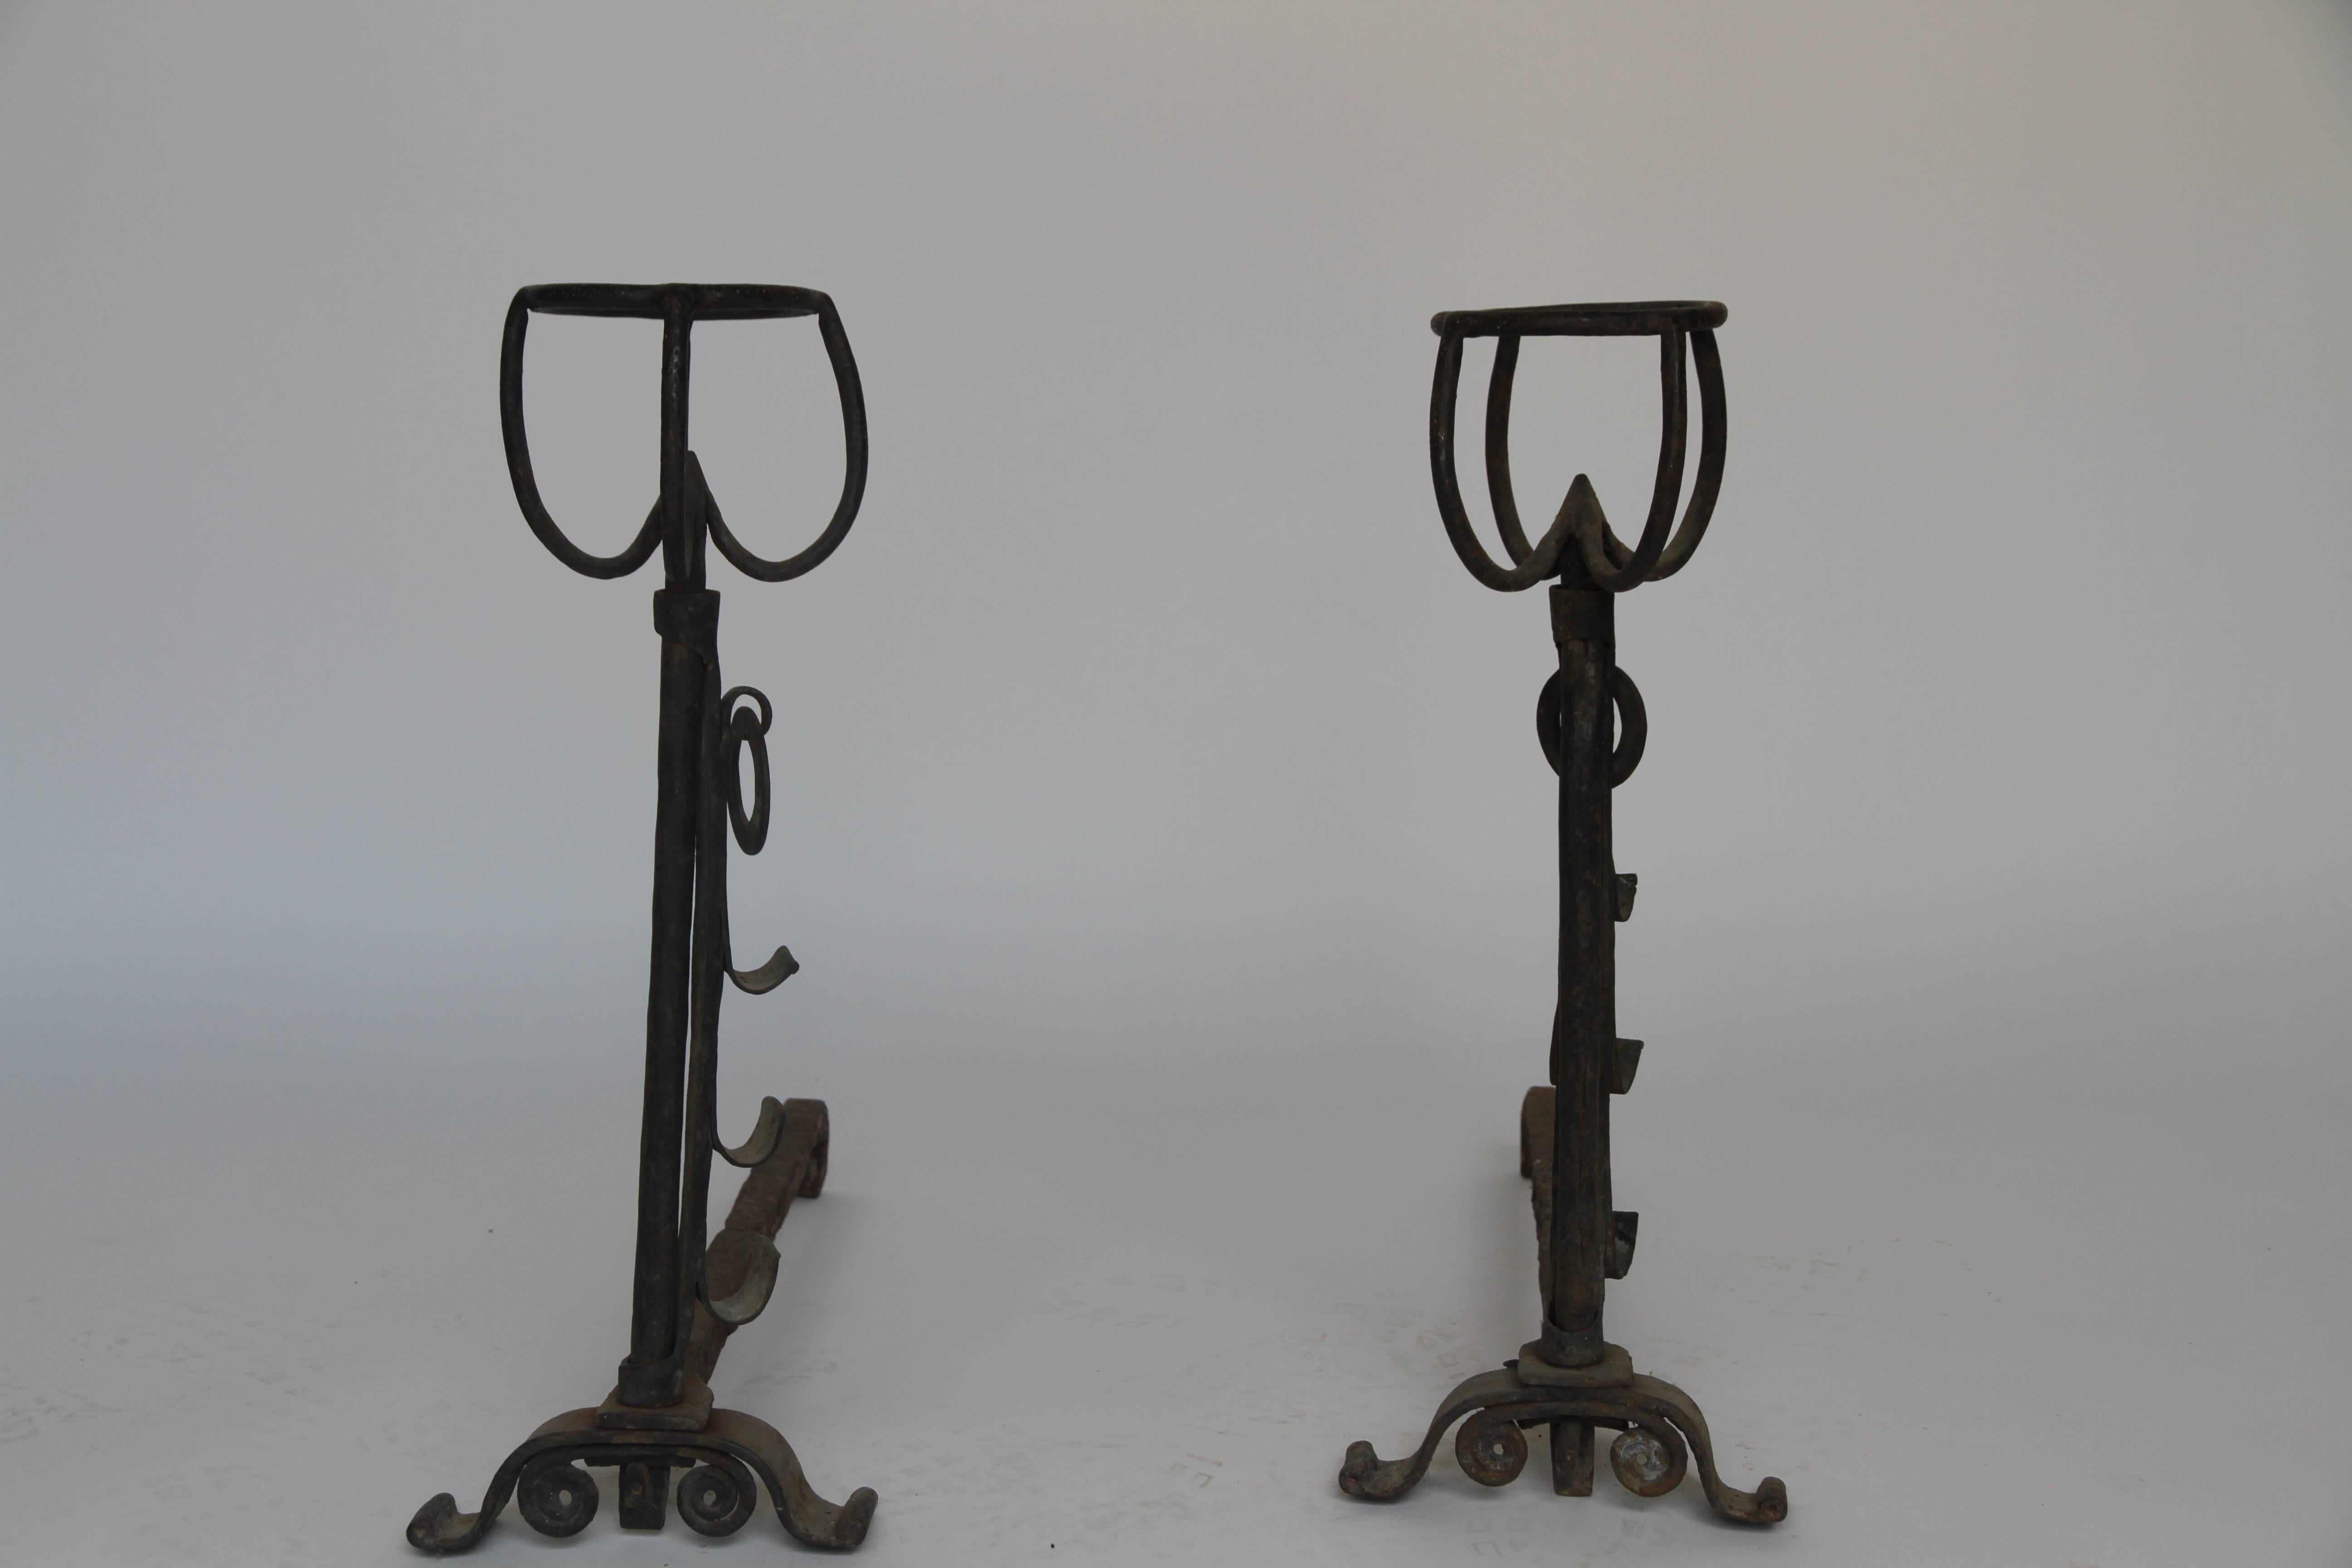 French Gothic andirons or fire dogs made of wrought iron. These French andirons are called 'landiers' in France. This dates from the times the andirons were the main cooking equipment in the house. They had spit hooks to grill meat or poultry and